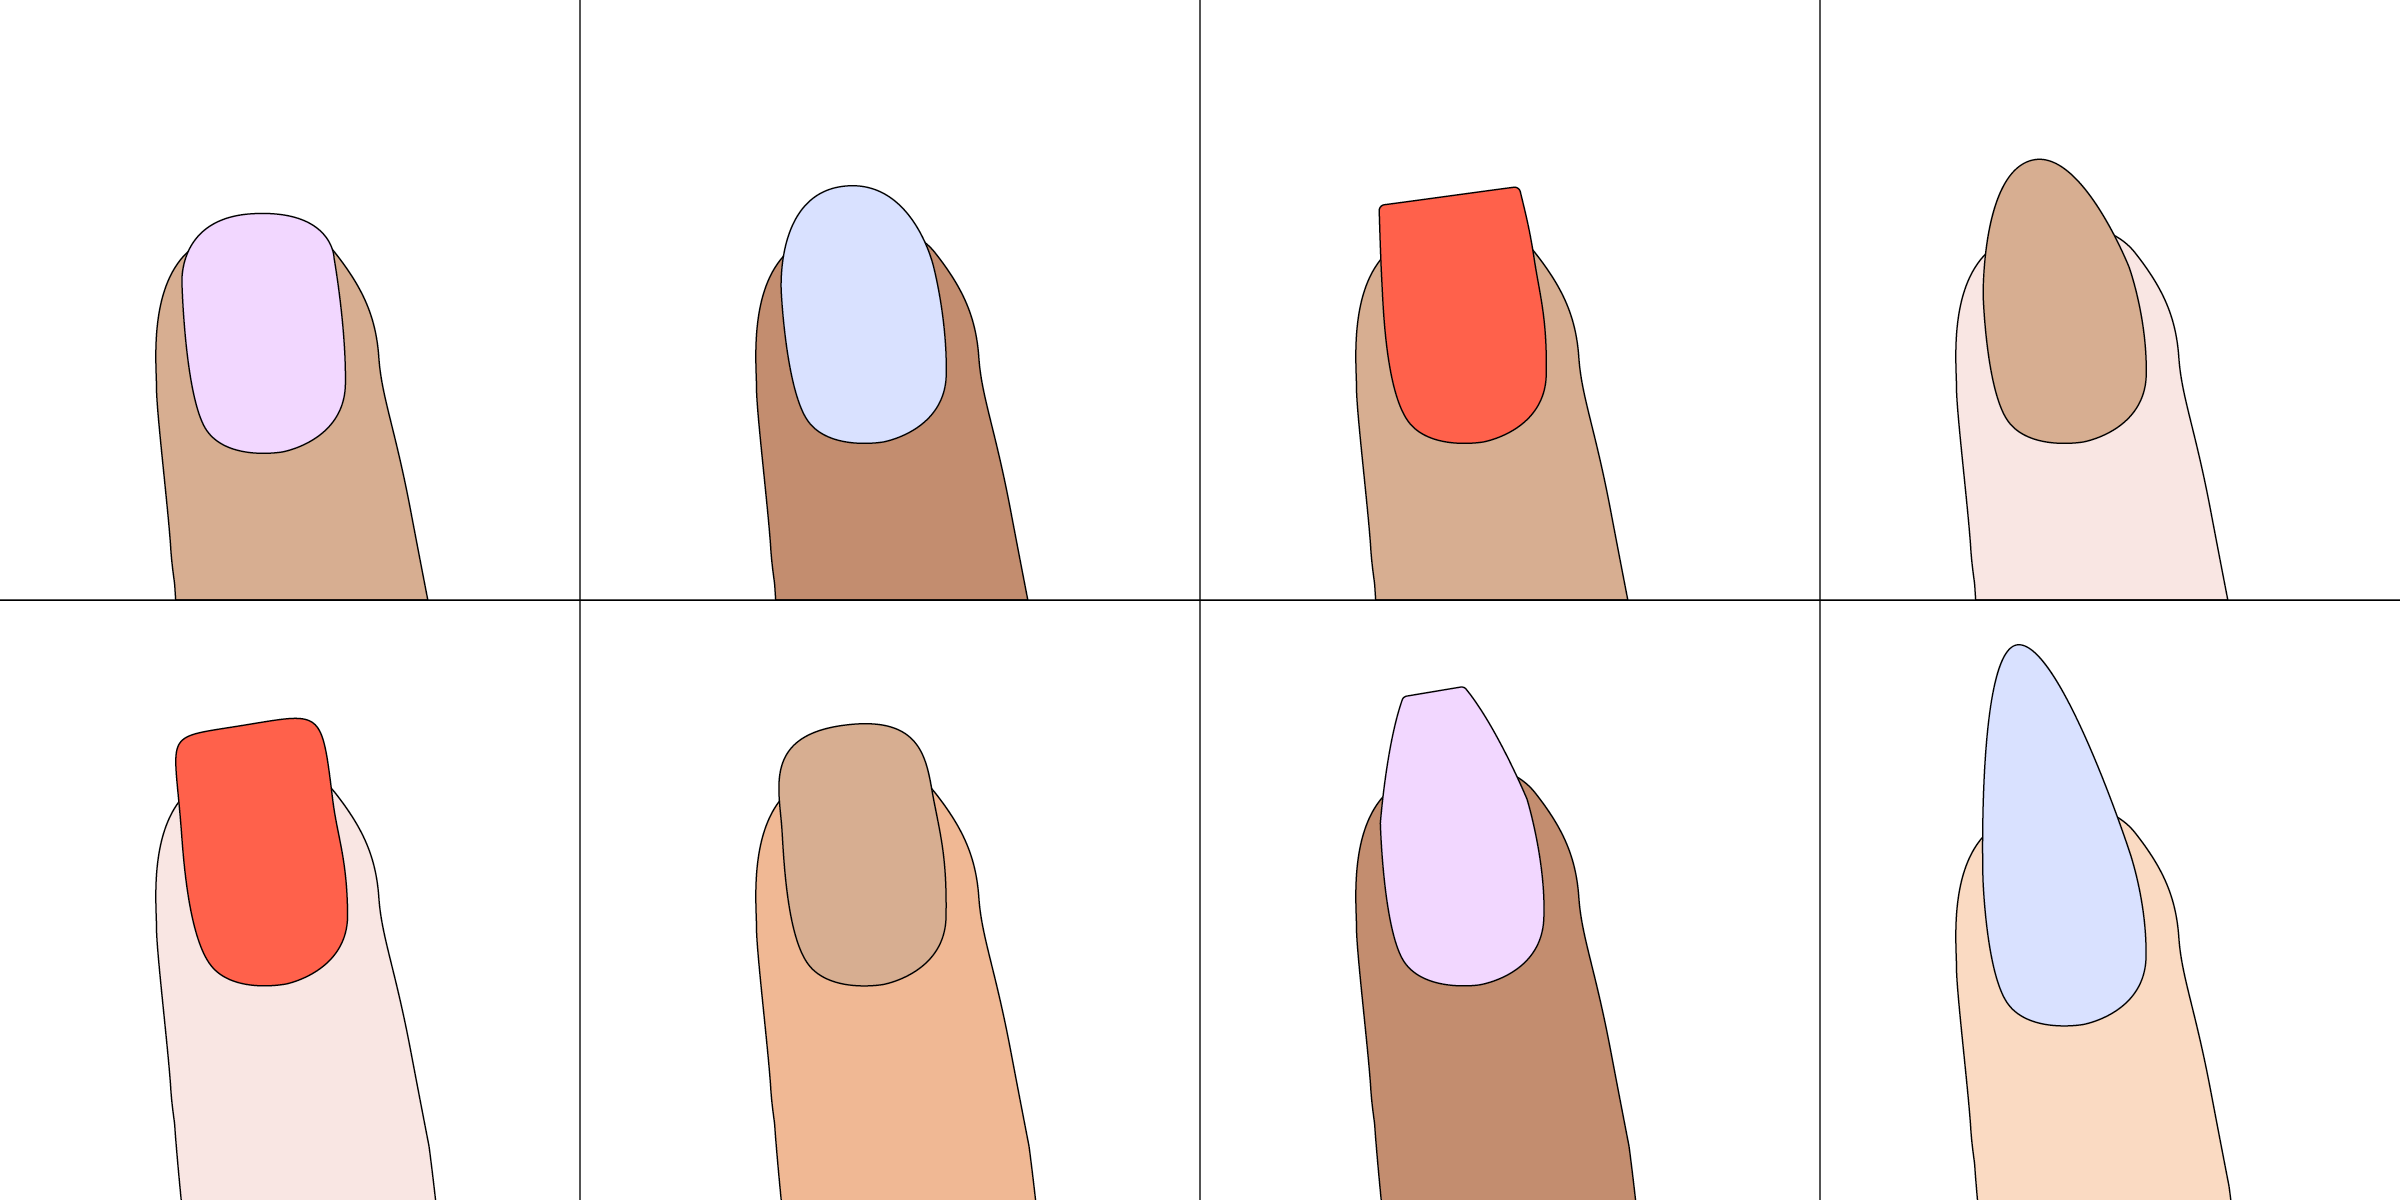 Choosing the Best Nail Shape for Clients